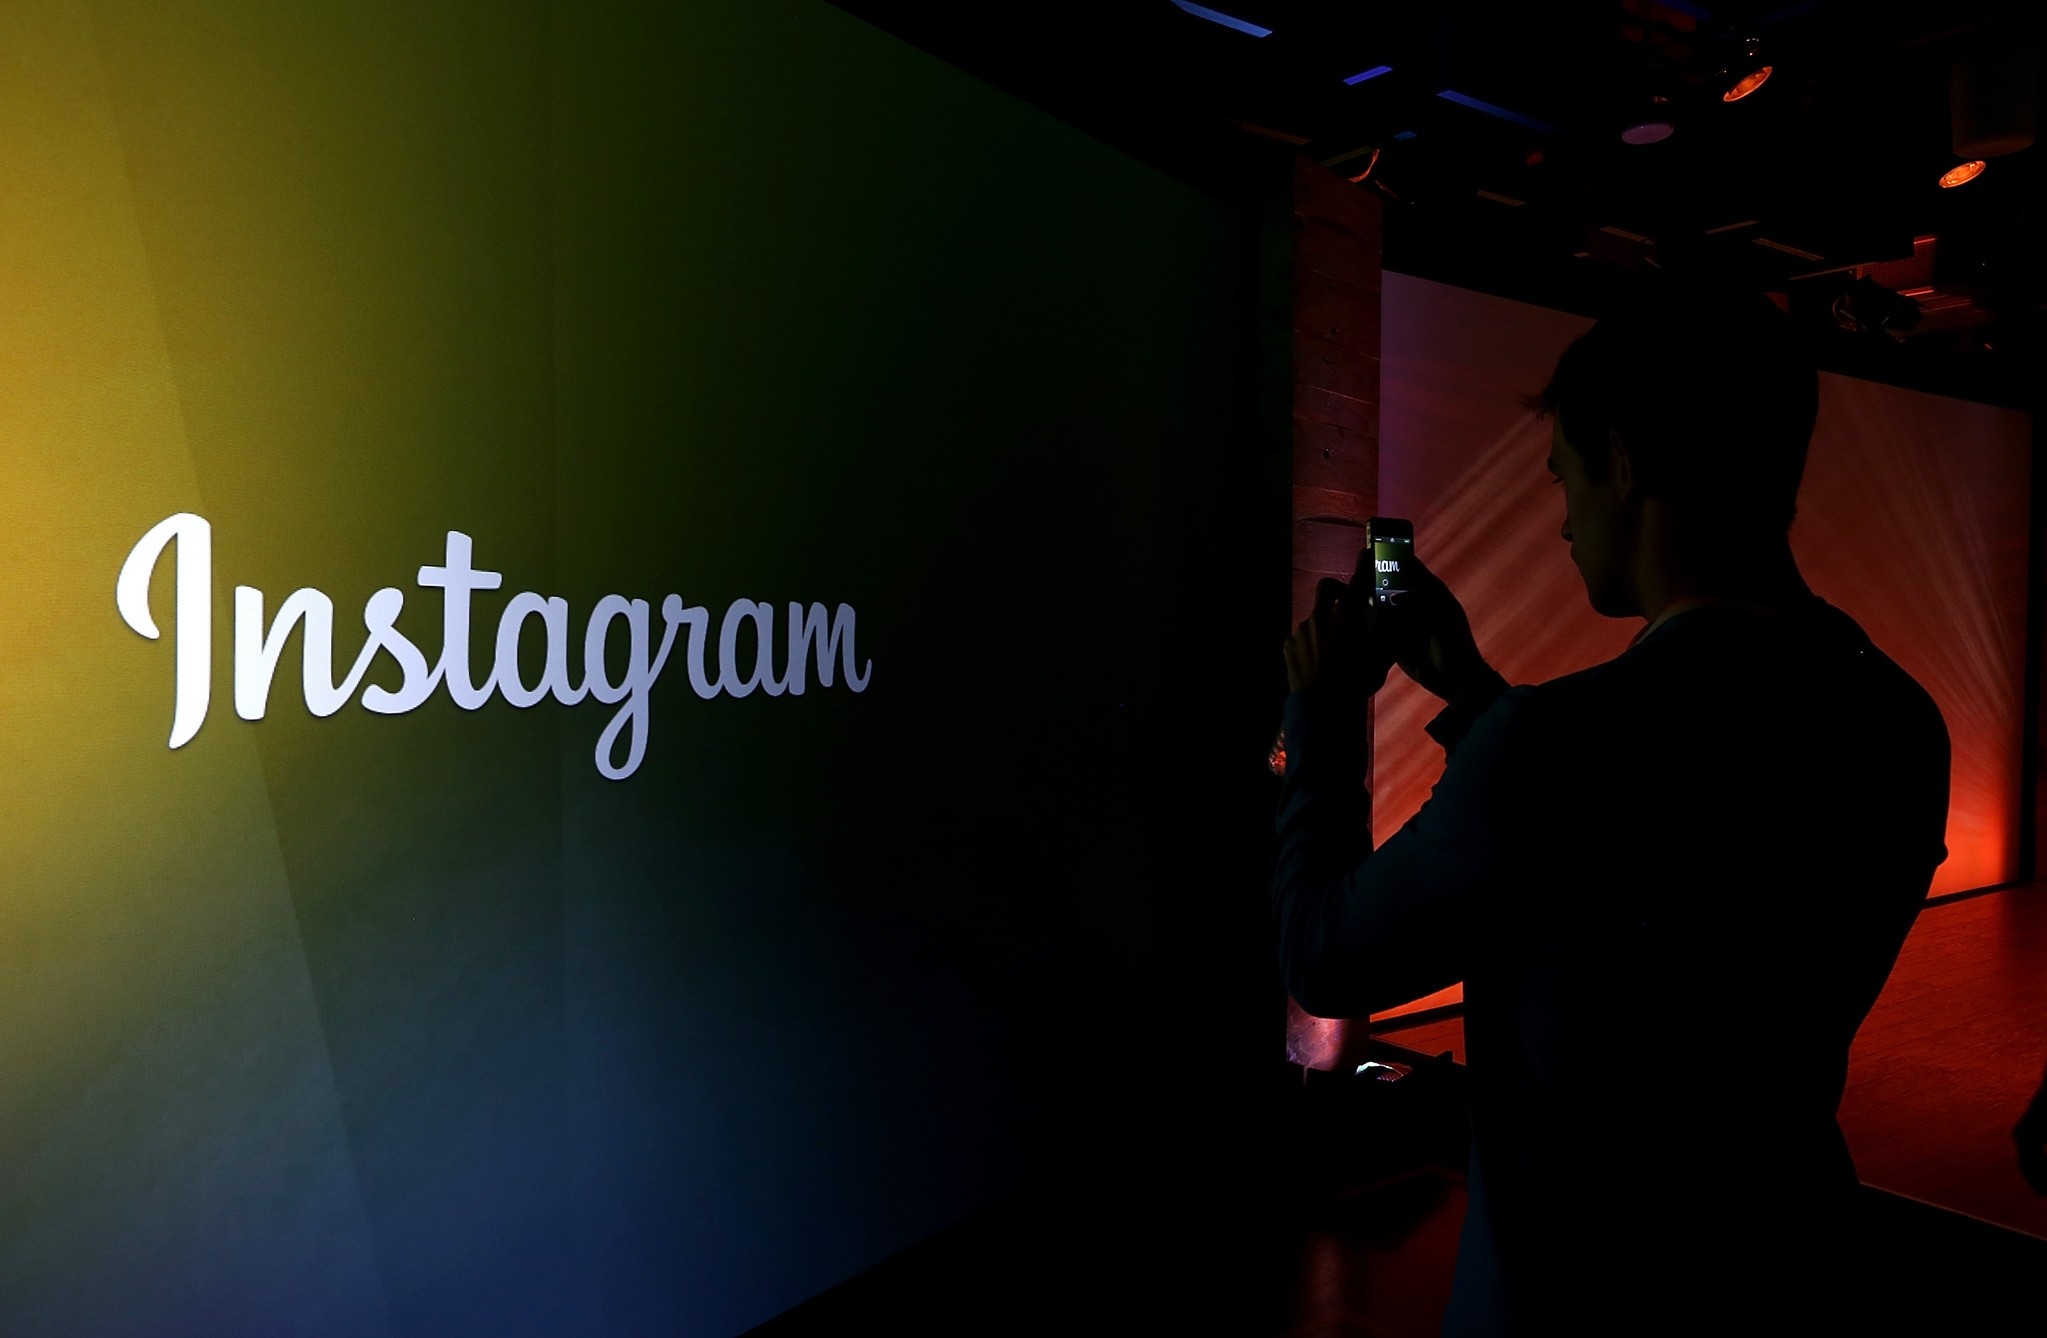 This file photo taken on June 19, 2013 shows an attendee takeing a photo of the instagram logo during a press event at Facebook headquarters in Menlo Park, California. (AFP Photo)